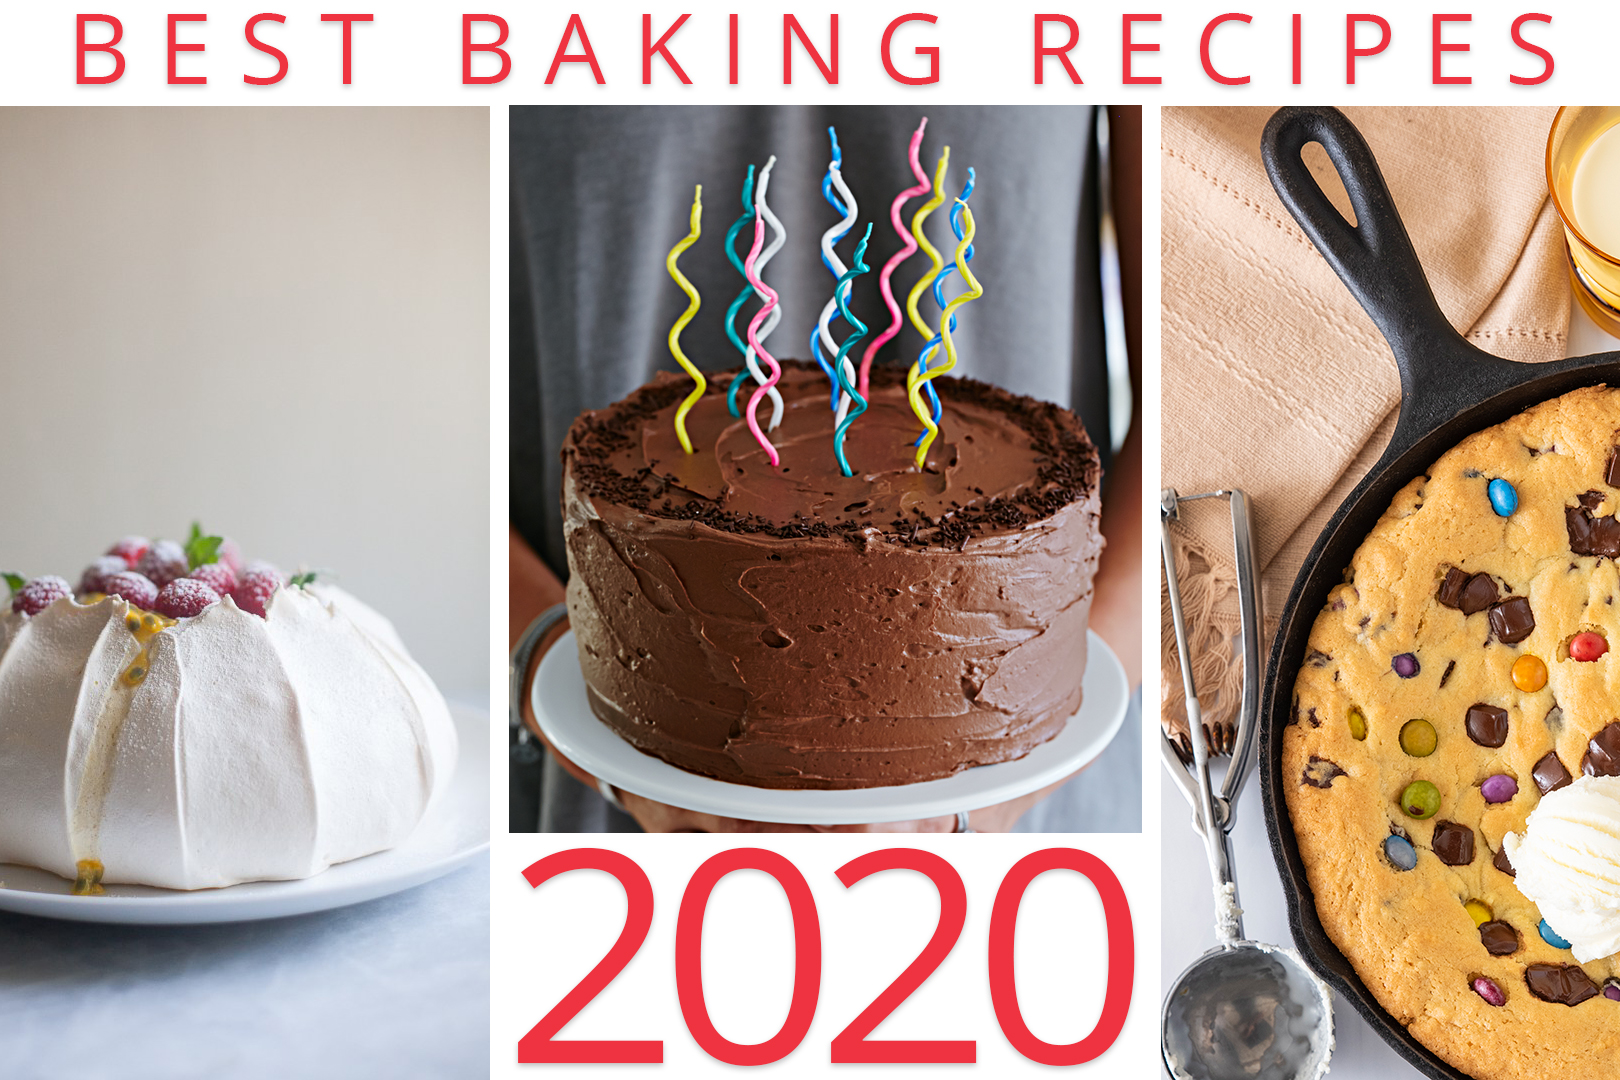 Best Baking Recipes 2020 — three recipes, a pavlova, a chocolate cake, and cookie.